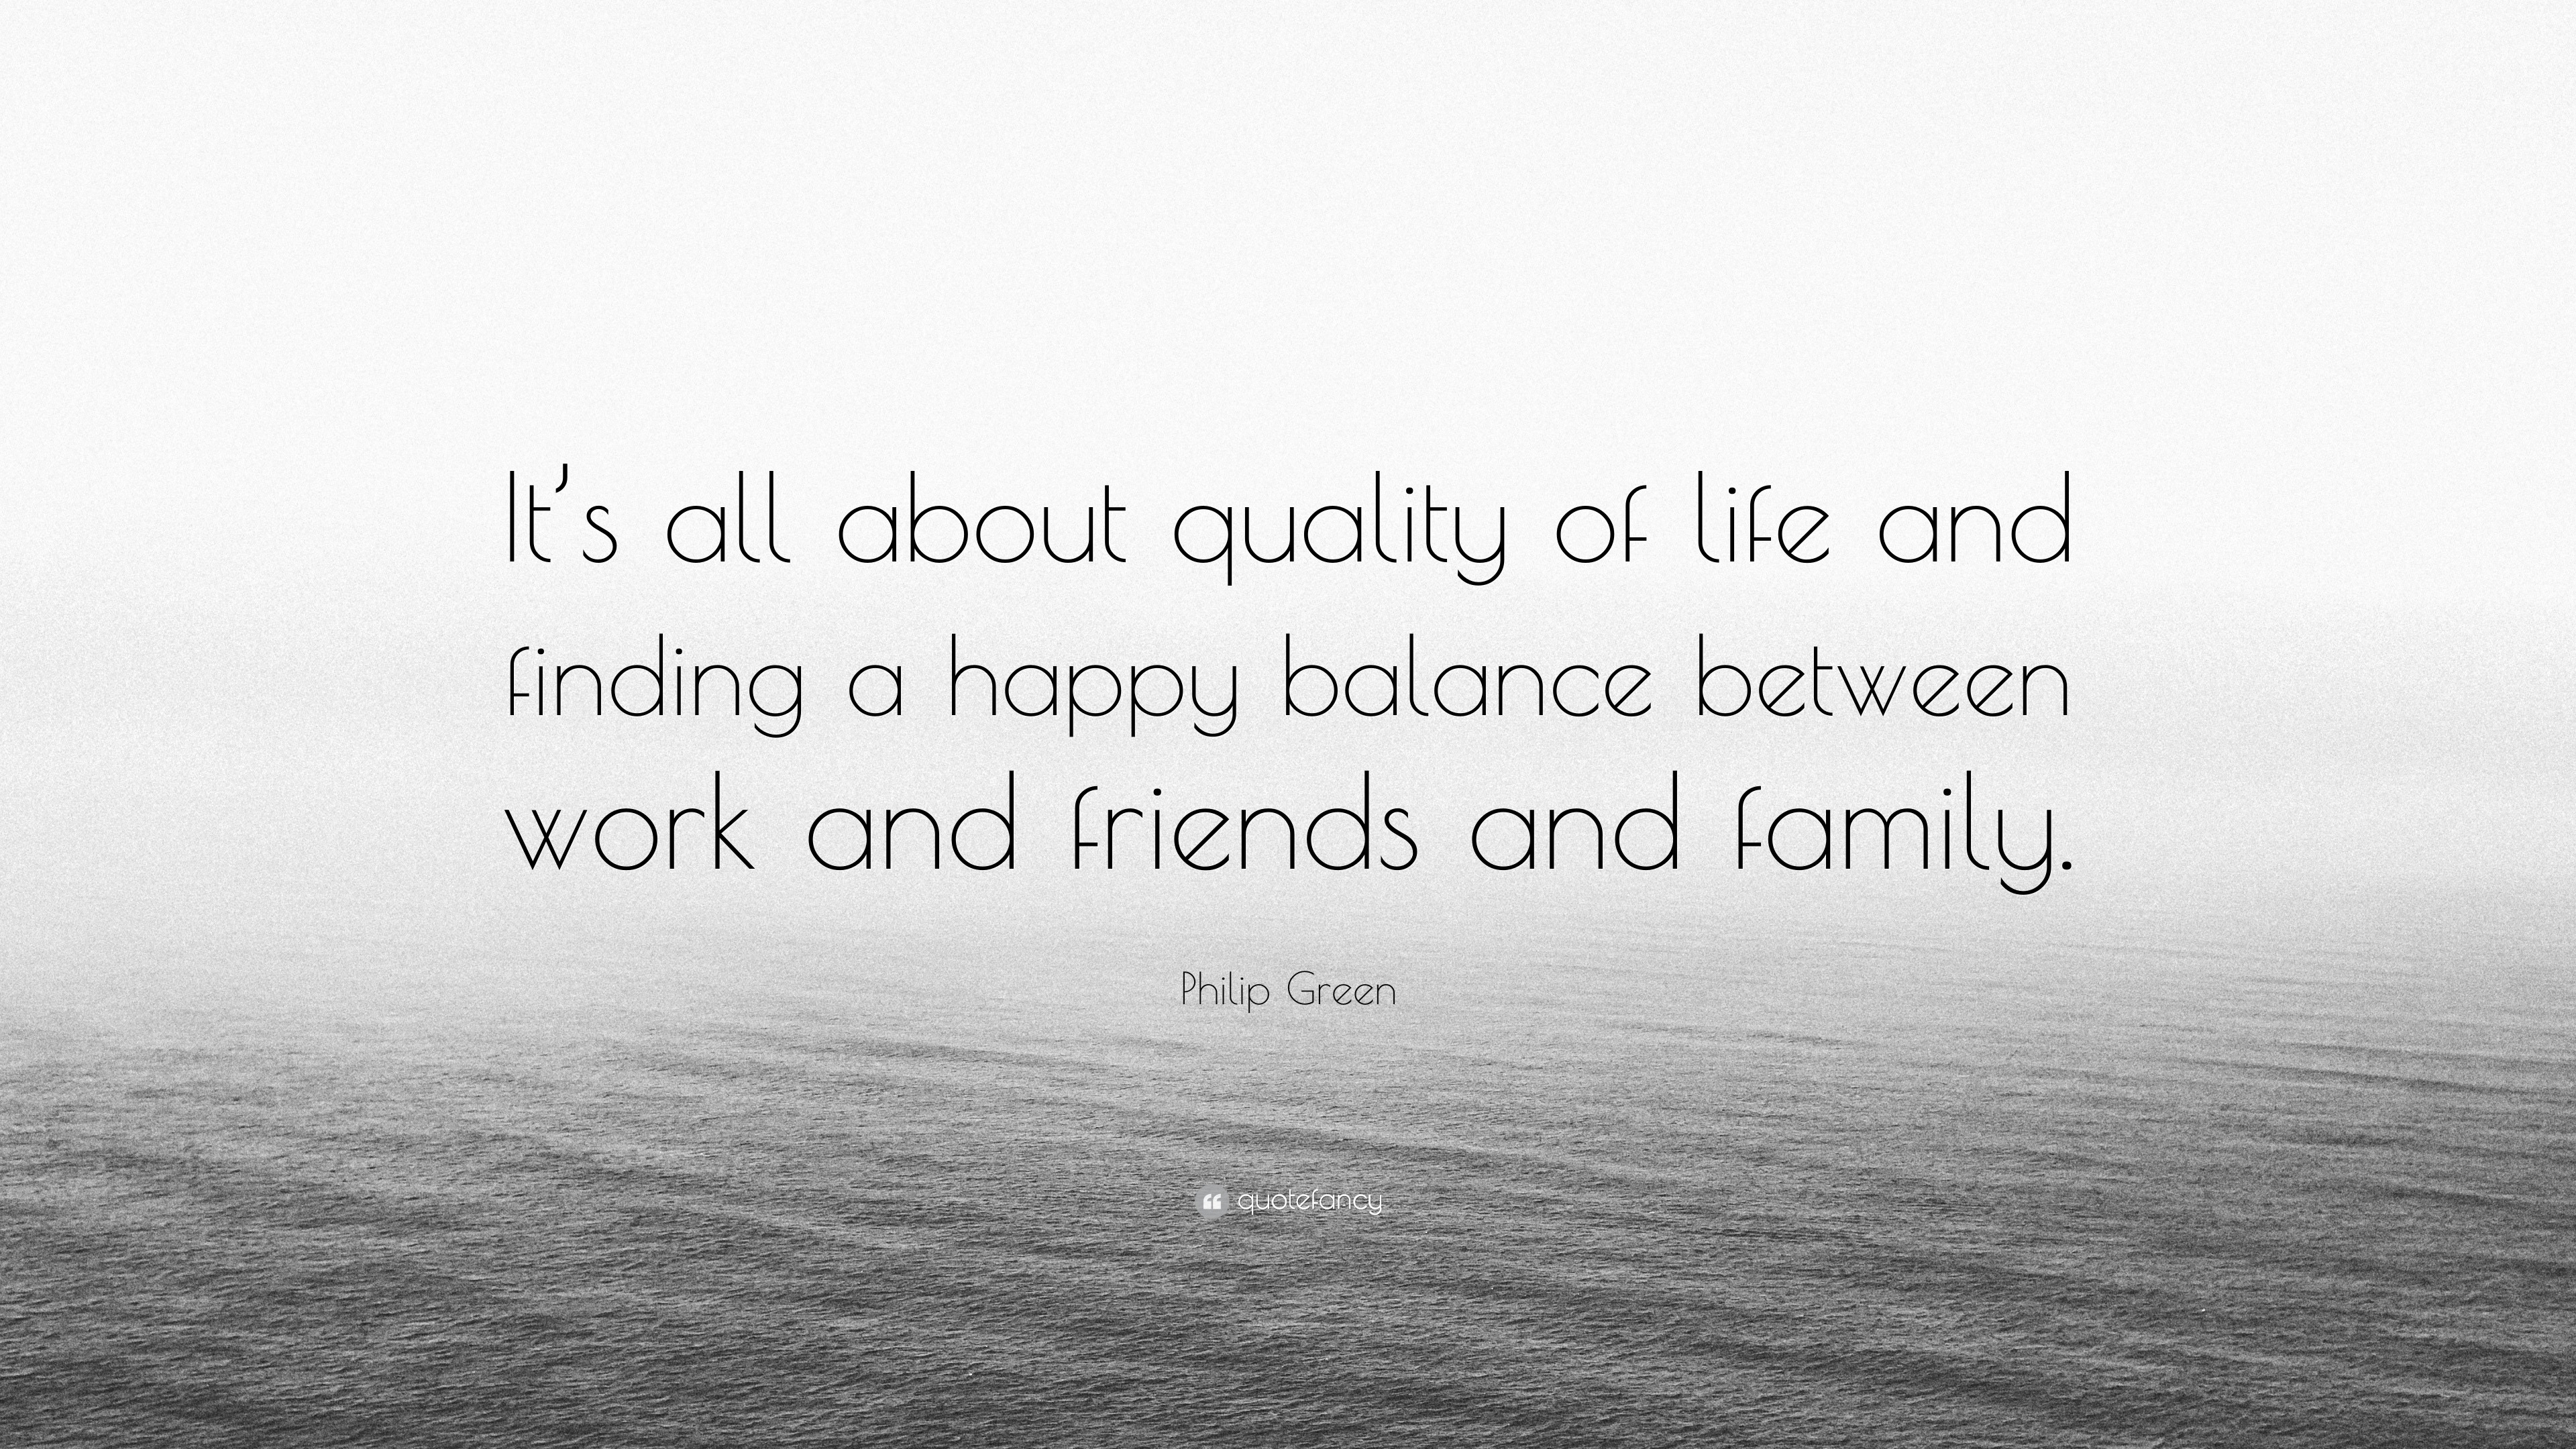 Philip Green Quote: “It’s all about quality of life and finding a happy